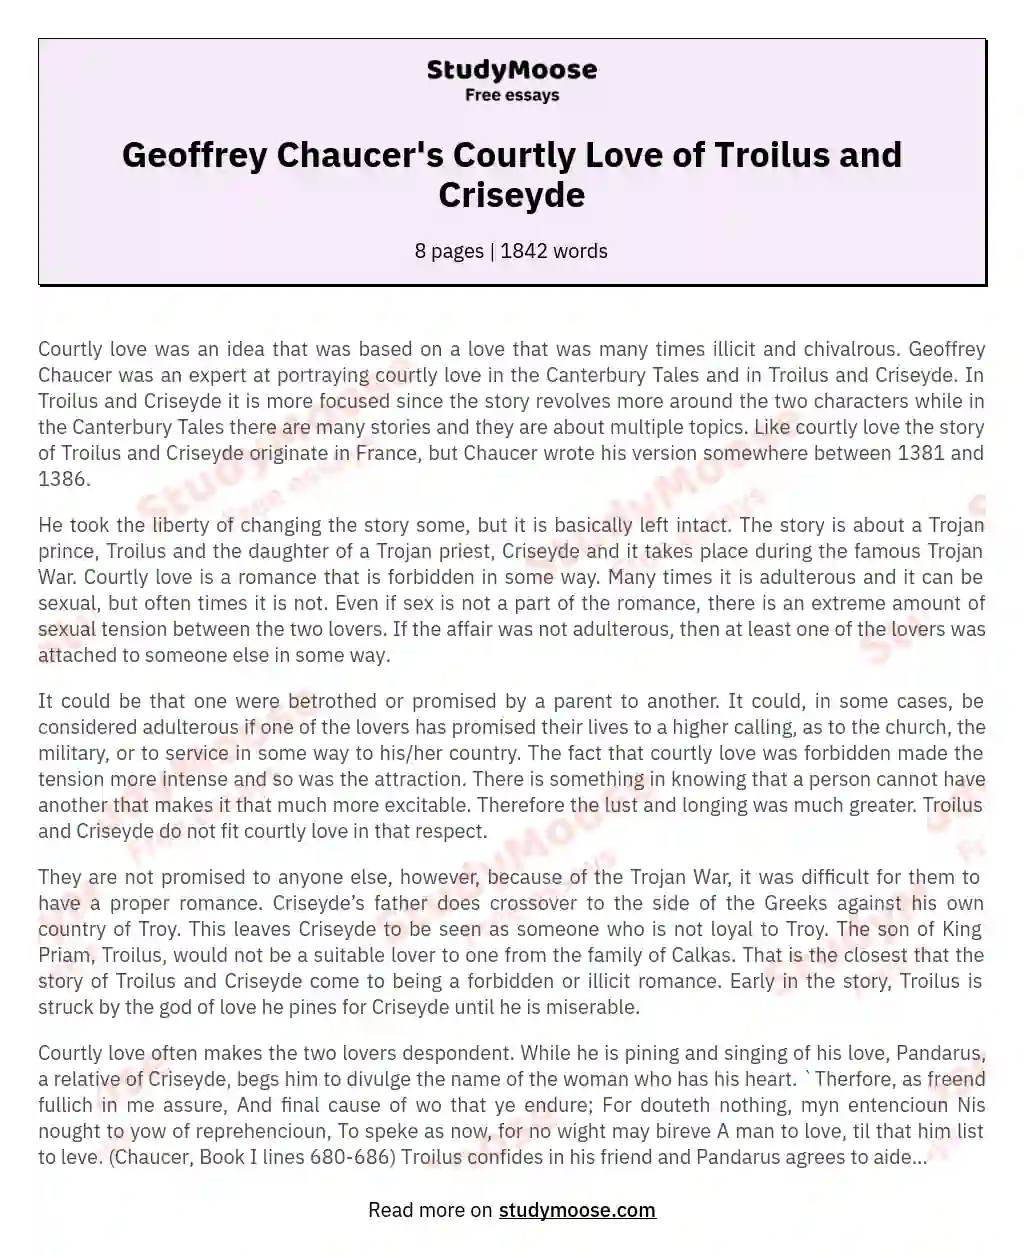 Geoffrey Chaucer's Courtly Love of Troilus and Criseyde